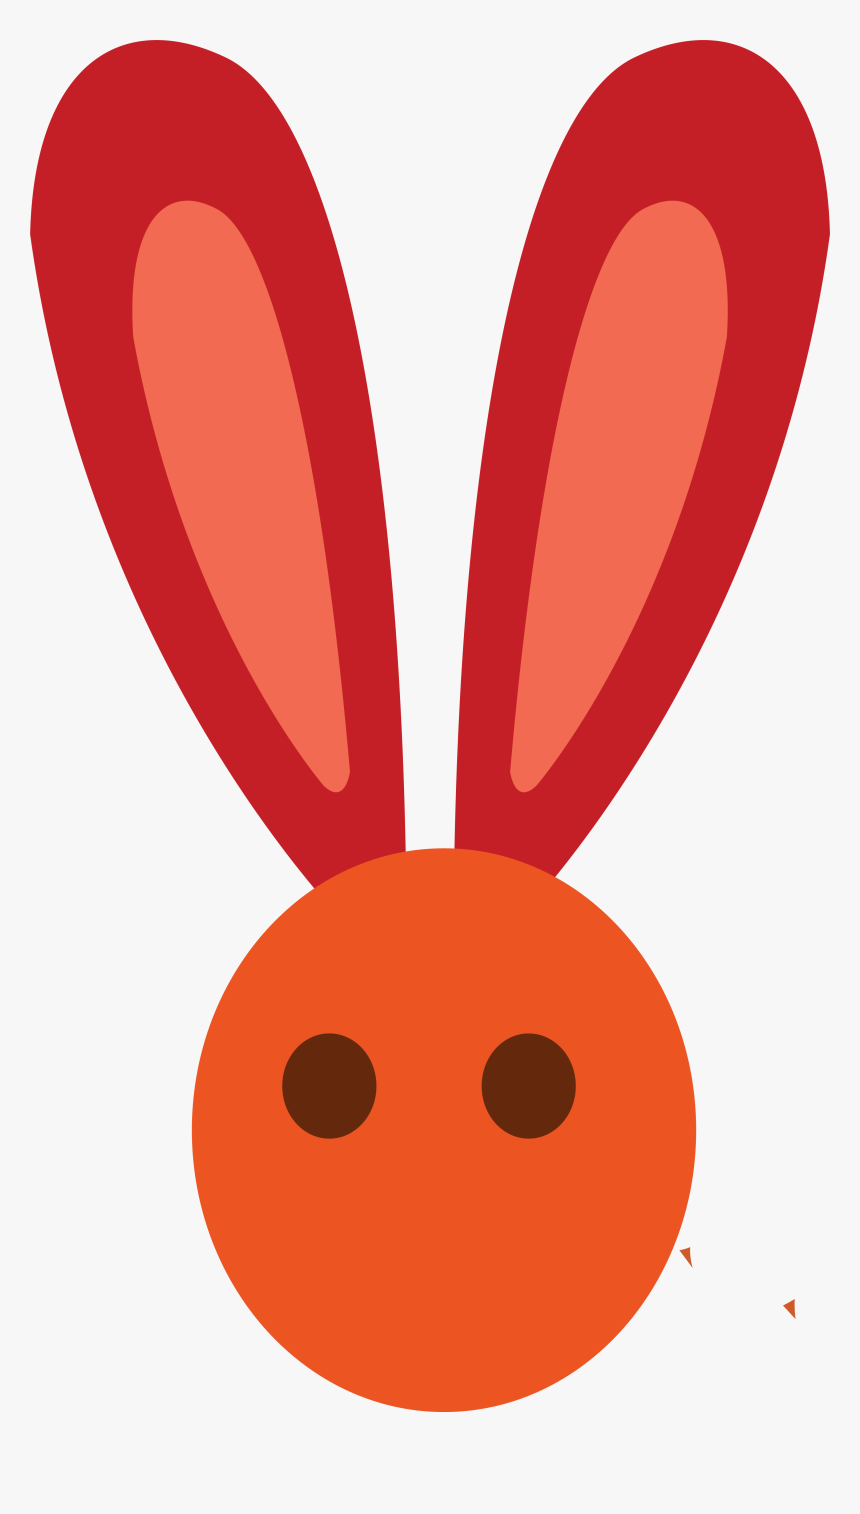 Red Bunny Ears Png - Pngkit selects 55 hd bunny ears png images for